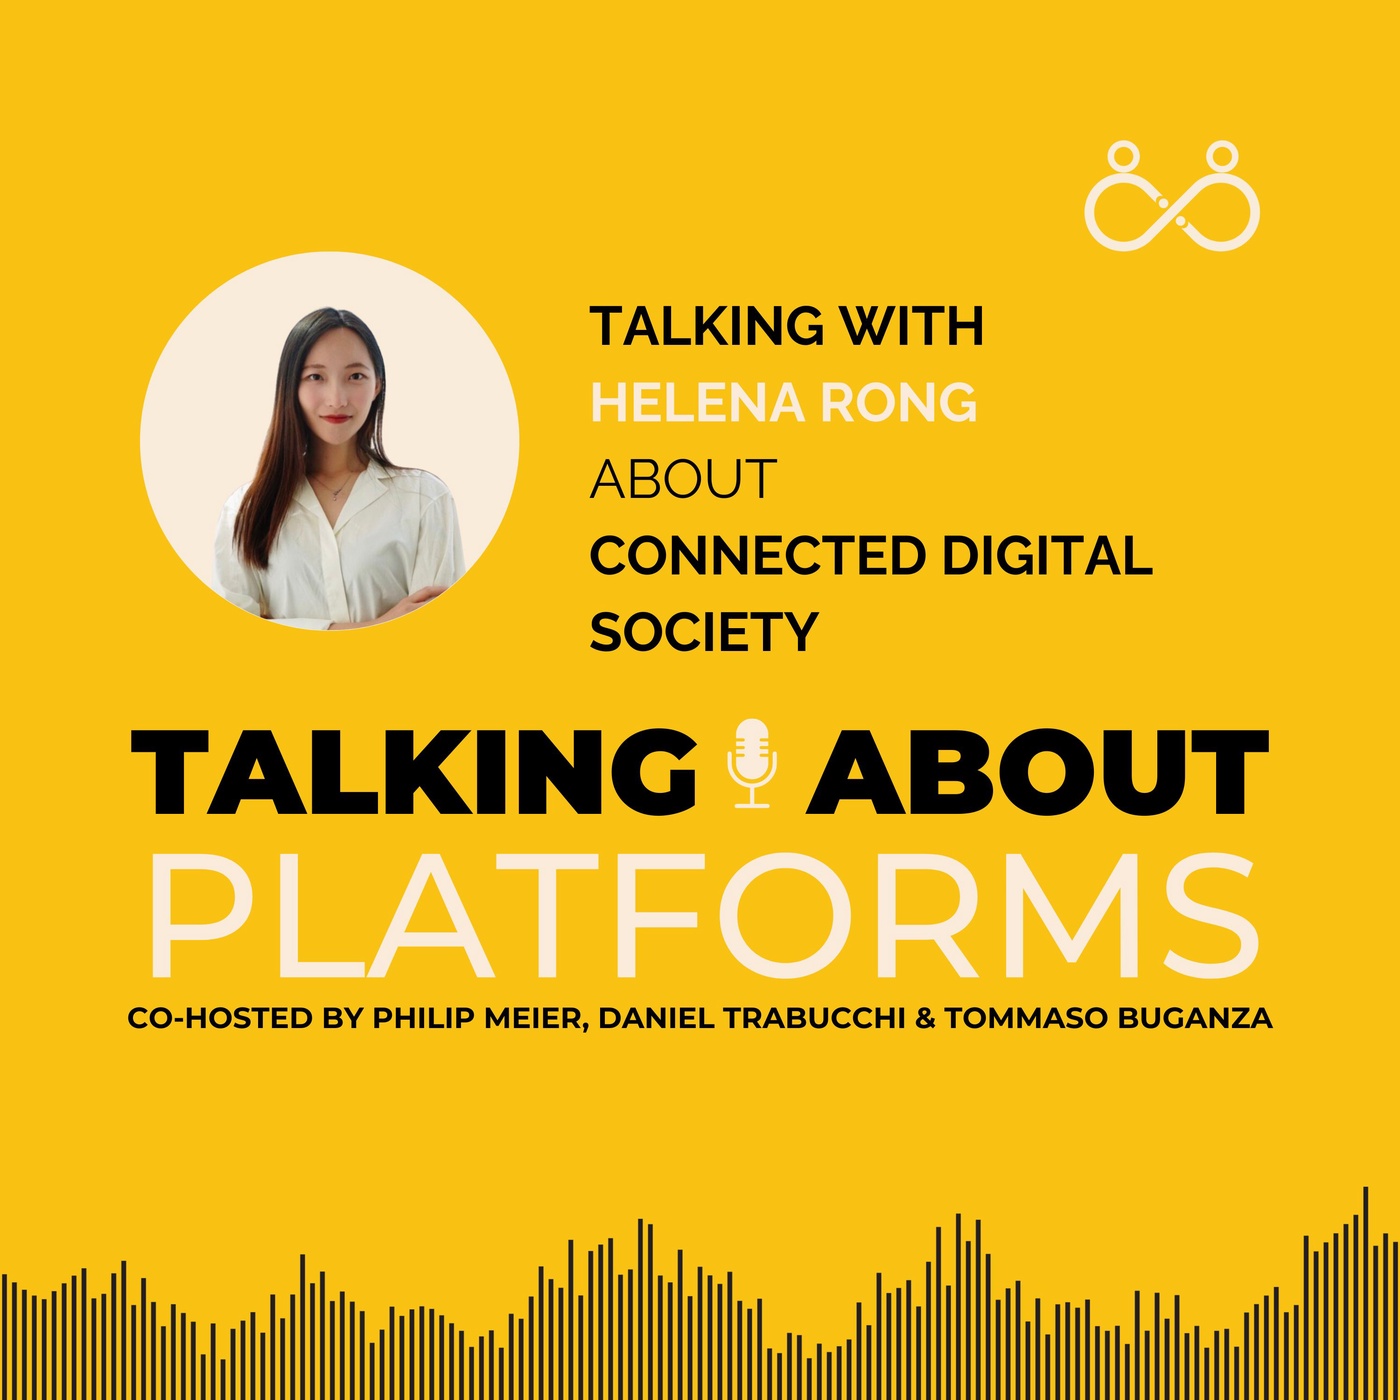 Connected digital society with Helena Rong